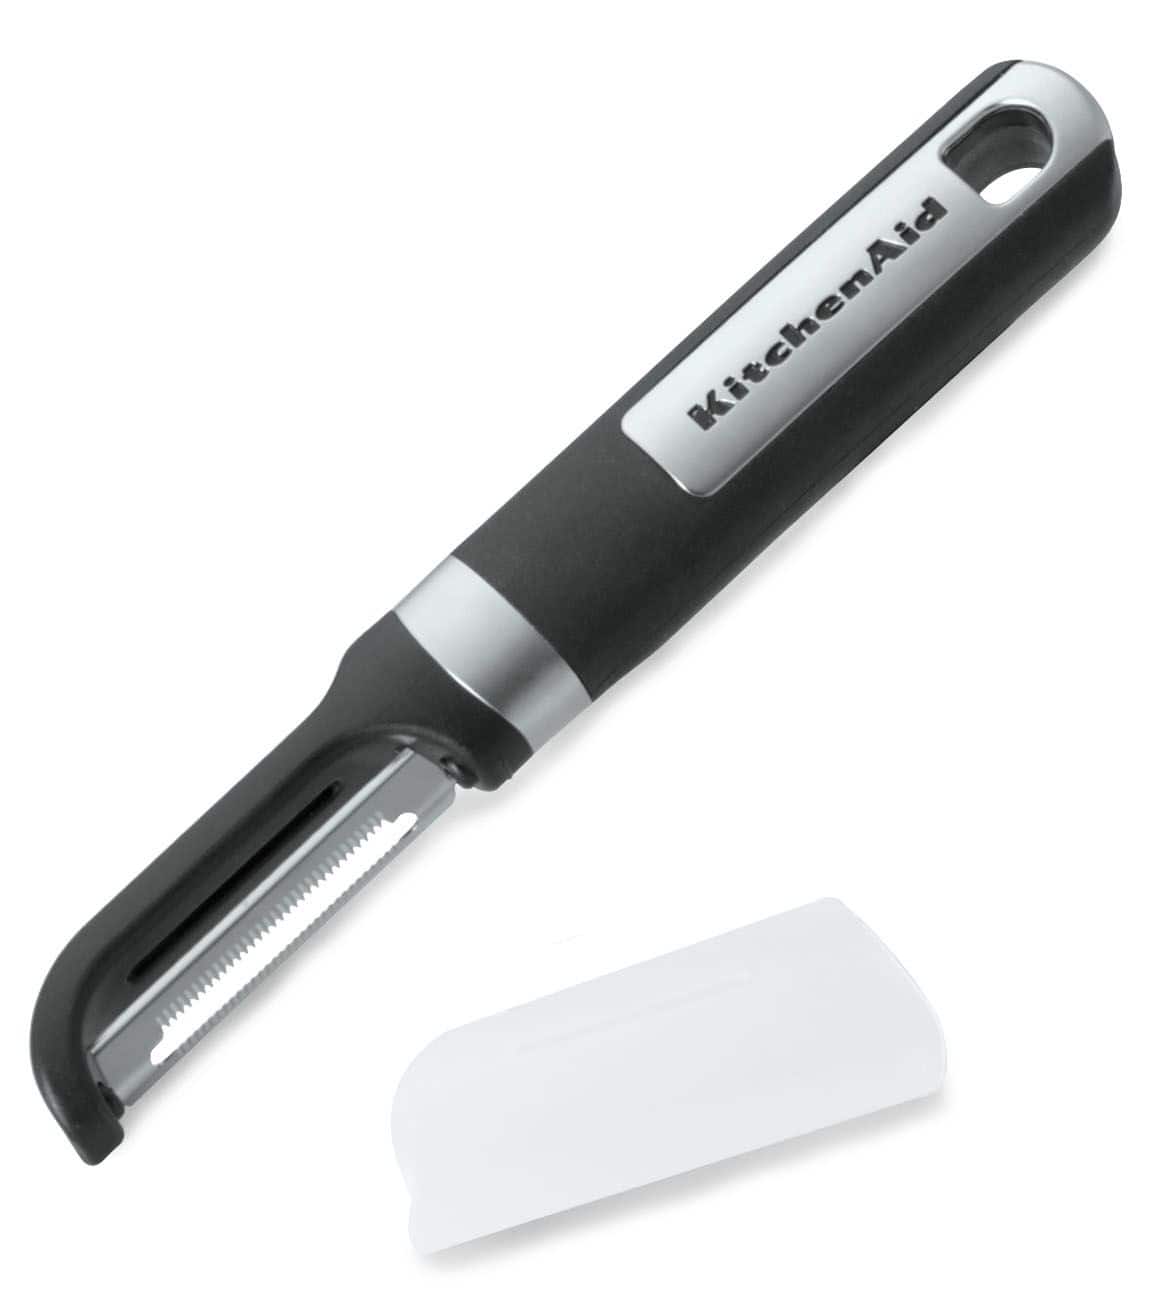 https://media-www.canadiantire.ca/product/living/kitchen/kitchen-tools-thermometers/0422731/kitchenaid-black-euro-peeler-cfc299be-08b0-4c0a-808a-fad03177e1d0-jpgrendition.jpg